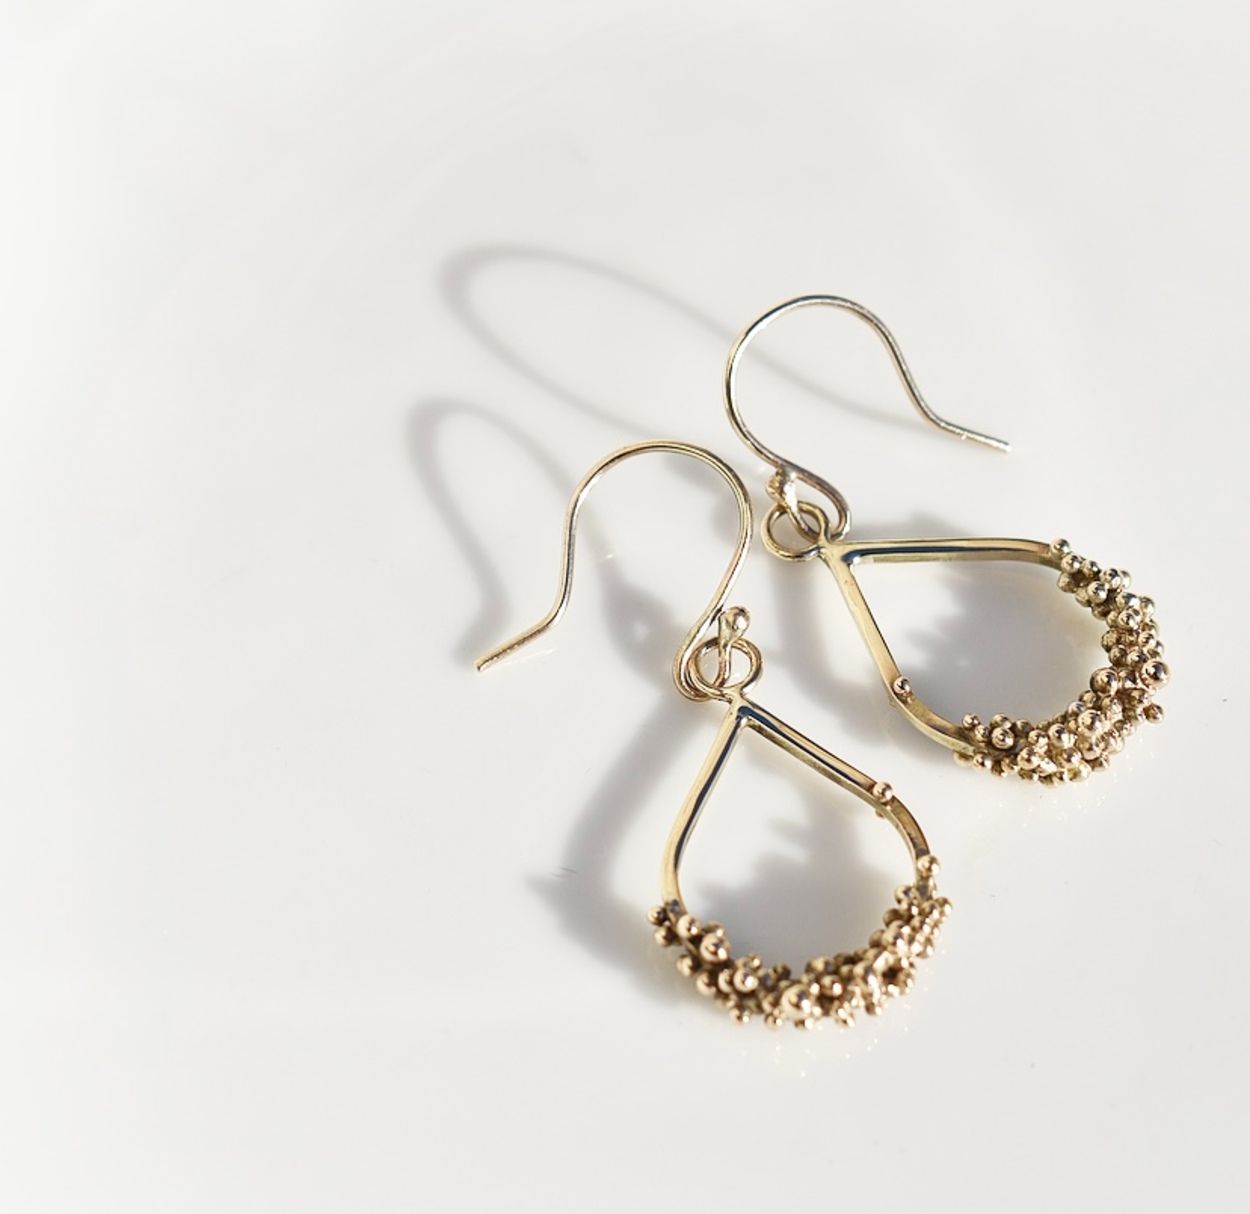 9ct Gold Granulation Earrings Ready To Ship- Vicky Callender Jewellery